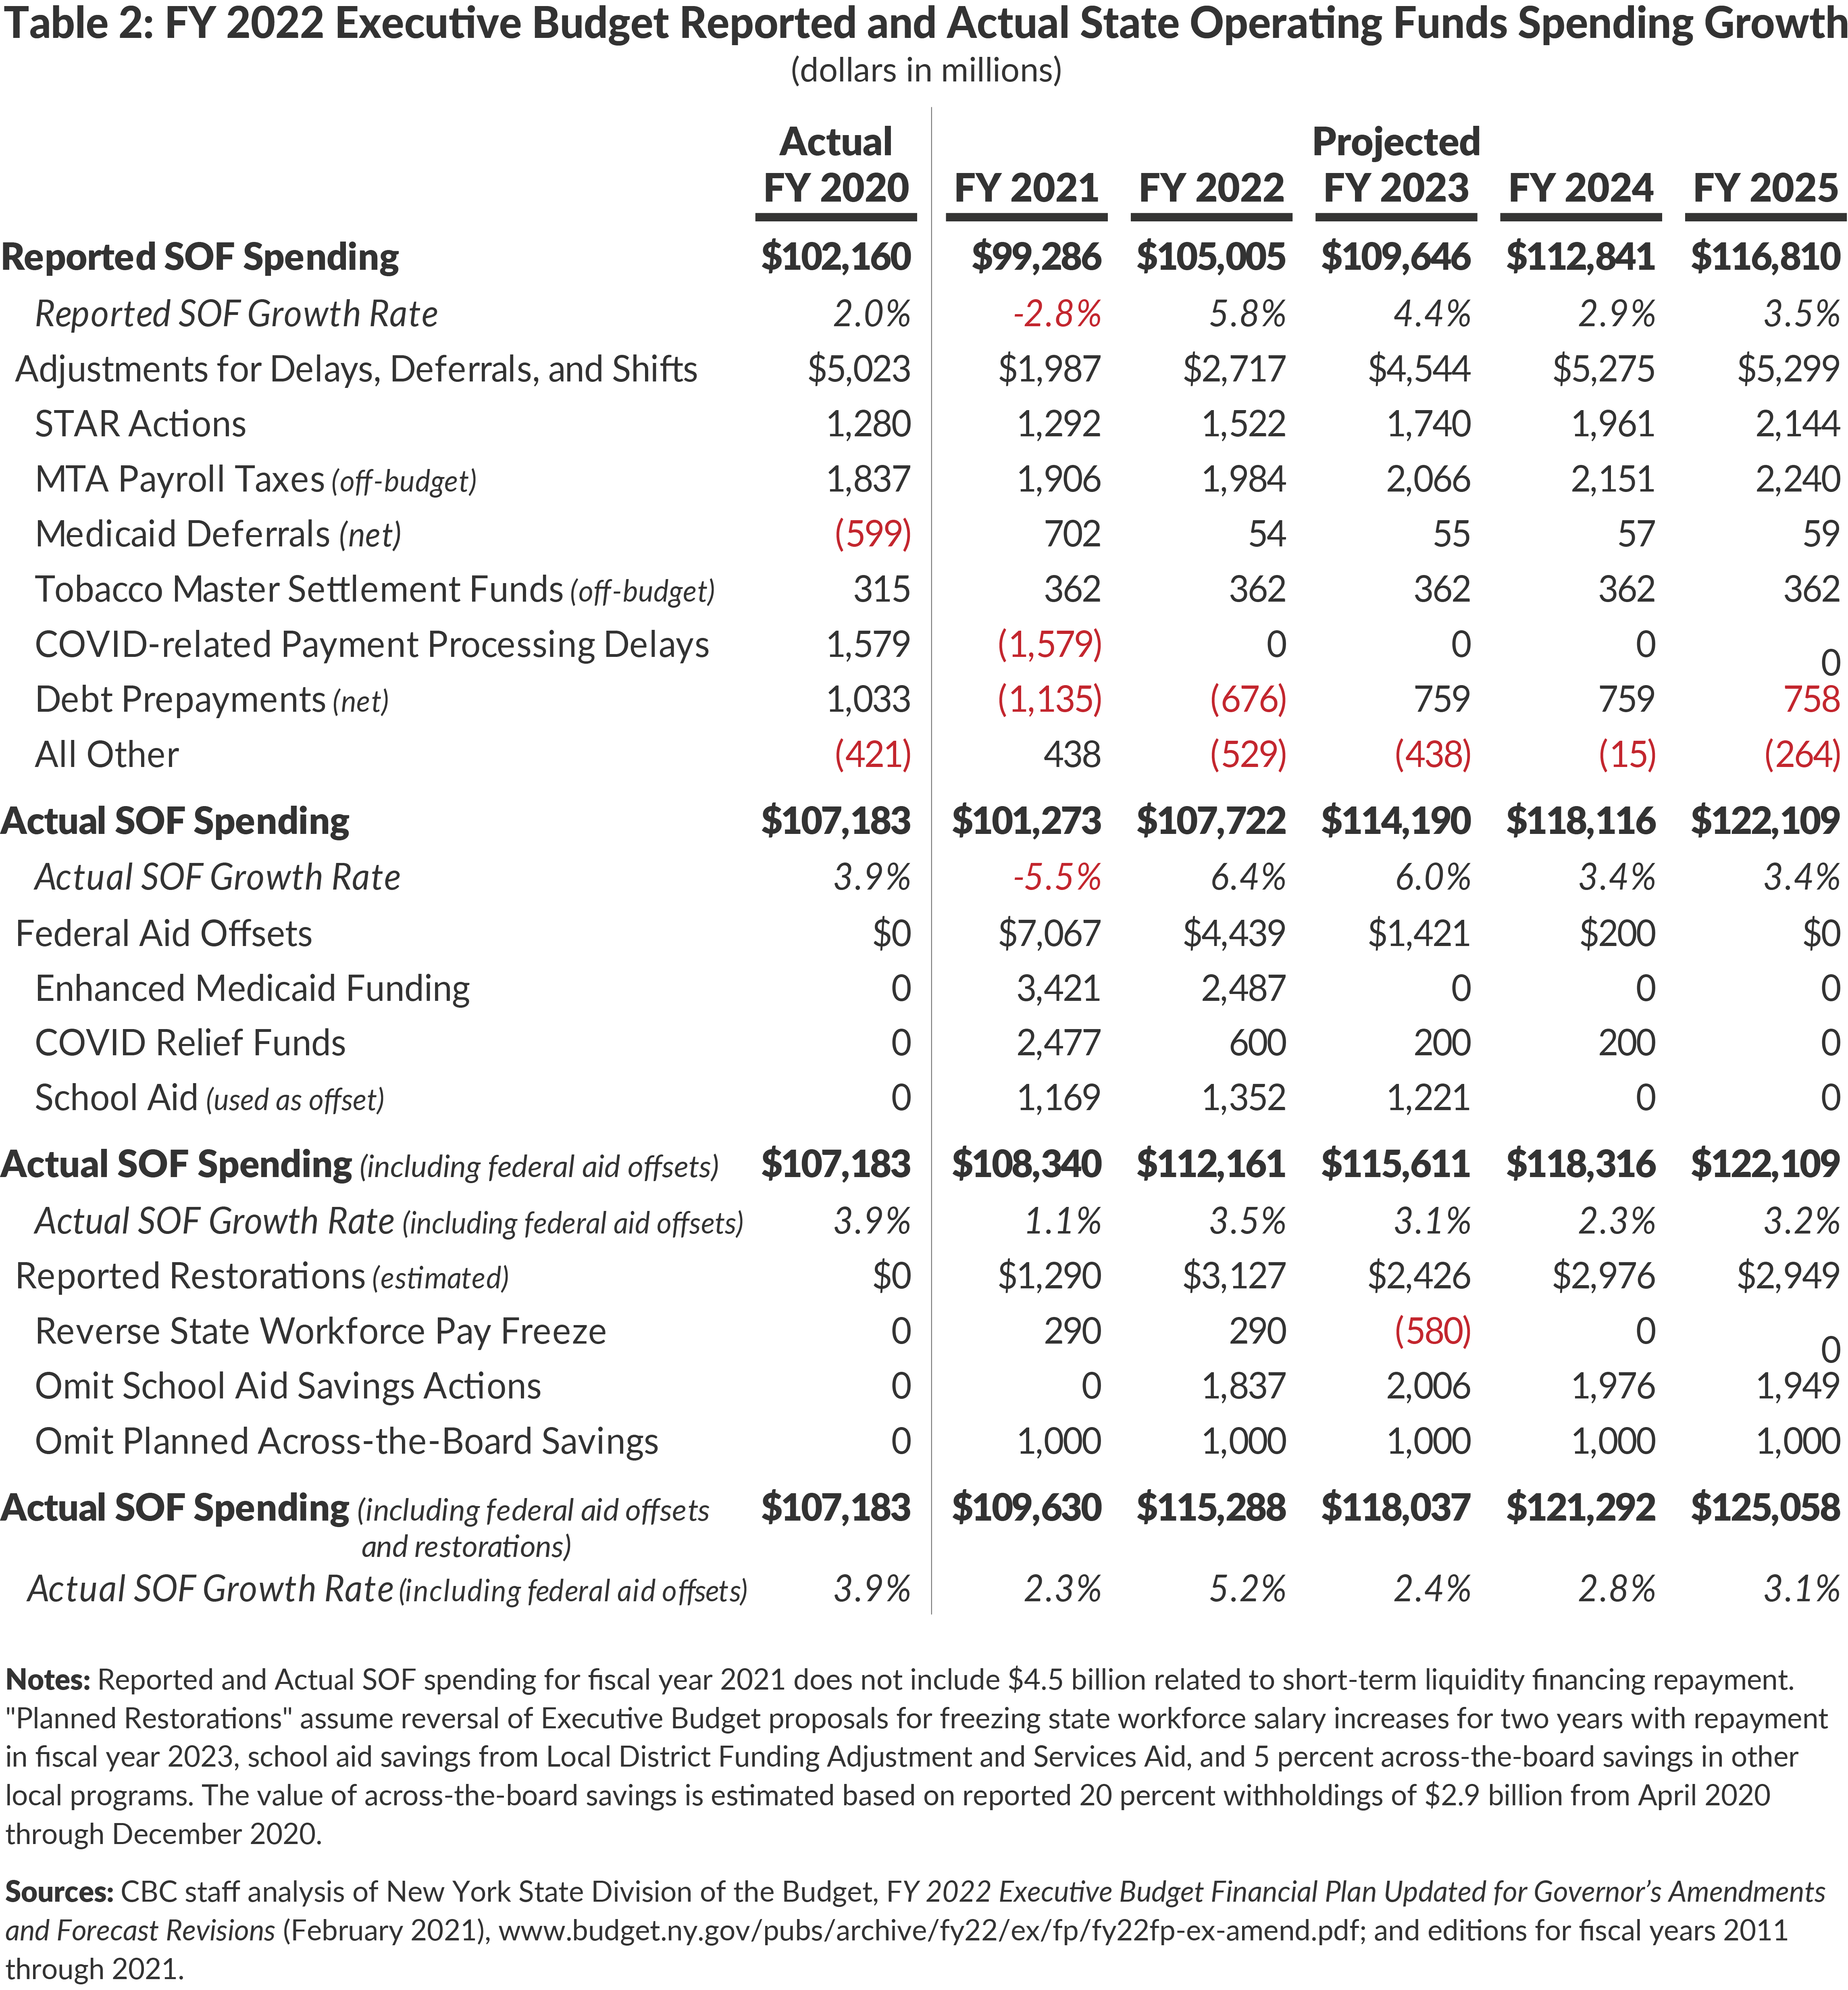 Table 2: FY 2022 Executive Budget Reported and Actual State Operating Funds Spending Growth